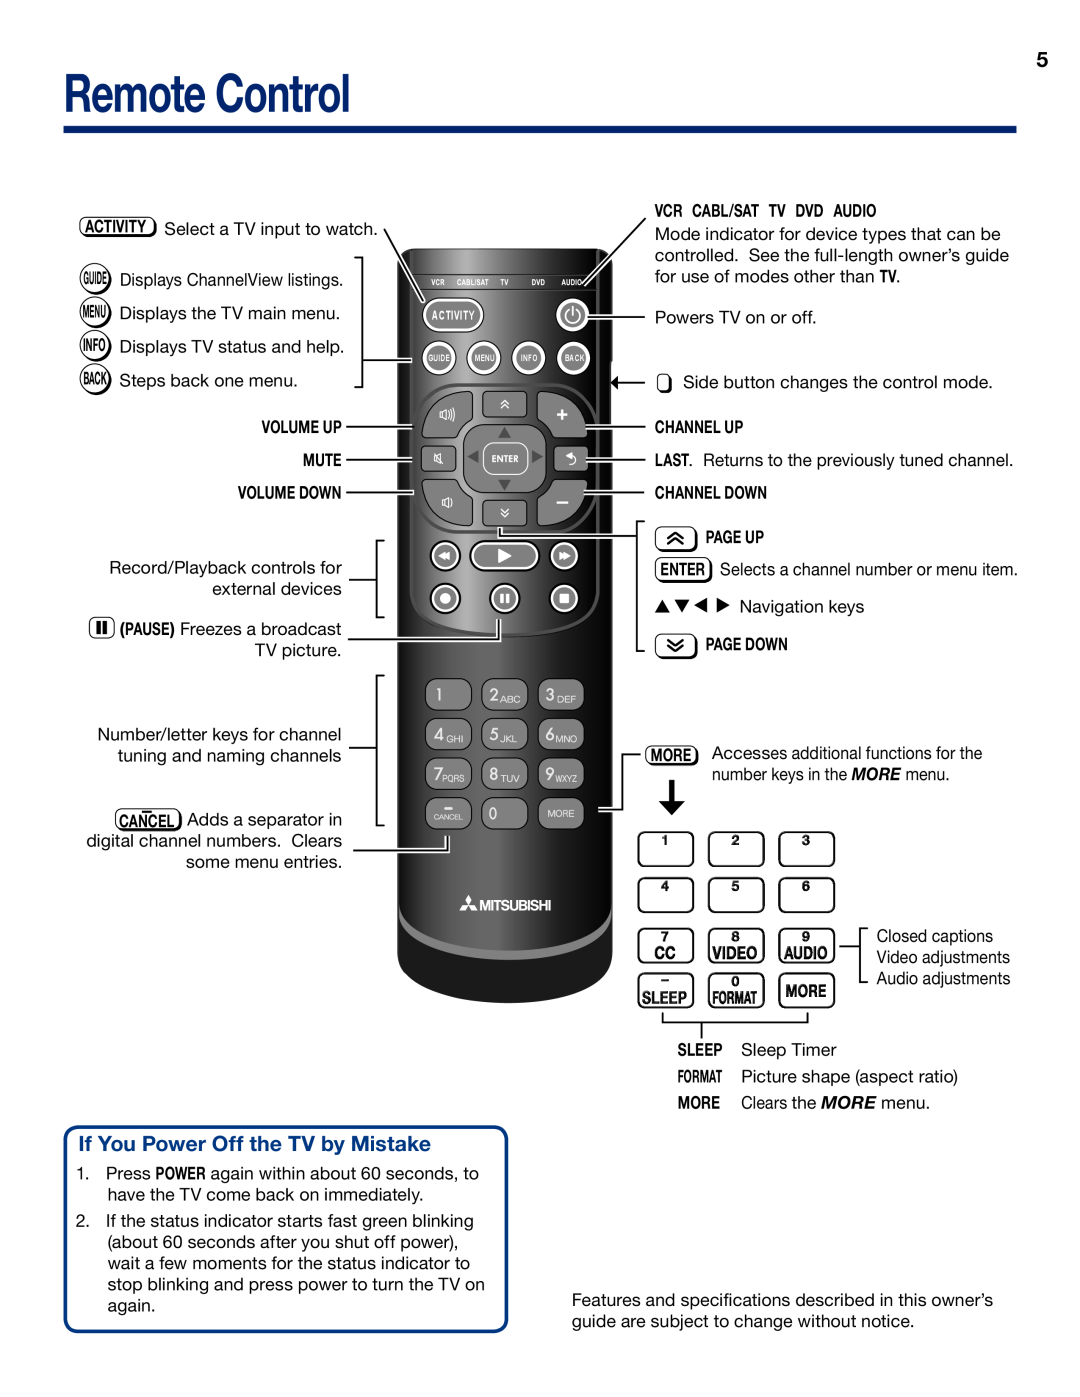 Mitsubishi Electronics WD-73837 Remote Control, Vcr Cabl/Sat Tv Dvd Audio, Volume Up Mute Volume Down, Cancel, Channel Up 